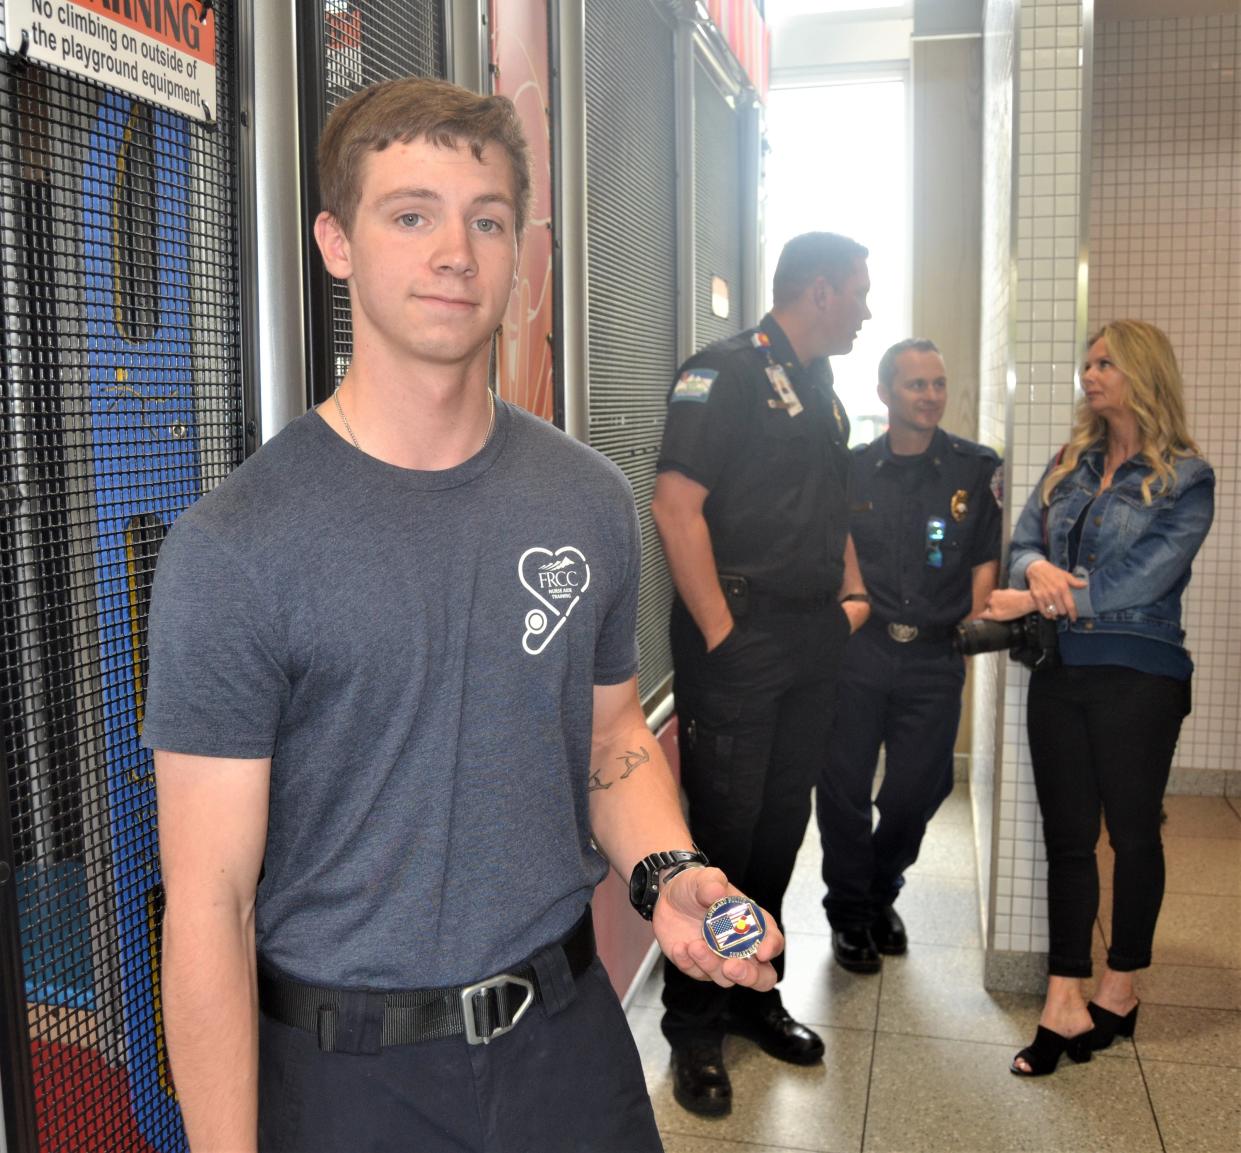 William Berglin, 18, shows off the honor coin he received from his school resource officer at Thompson Valley High School for helping saving a man's life a week earlier before a news conference May 24, 2023, at a McDonald's restaurant in Loveland, Colo.